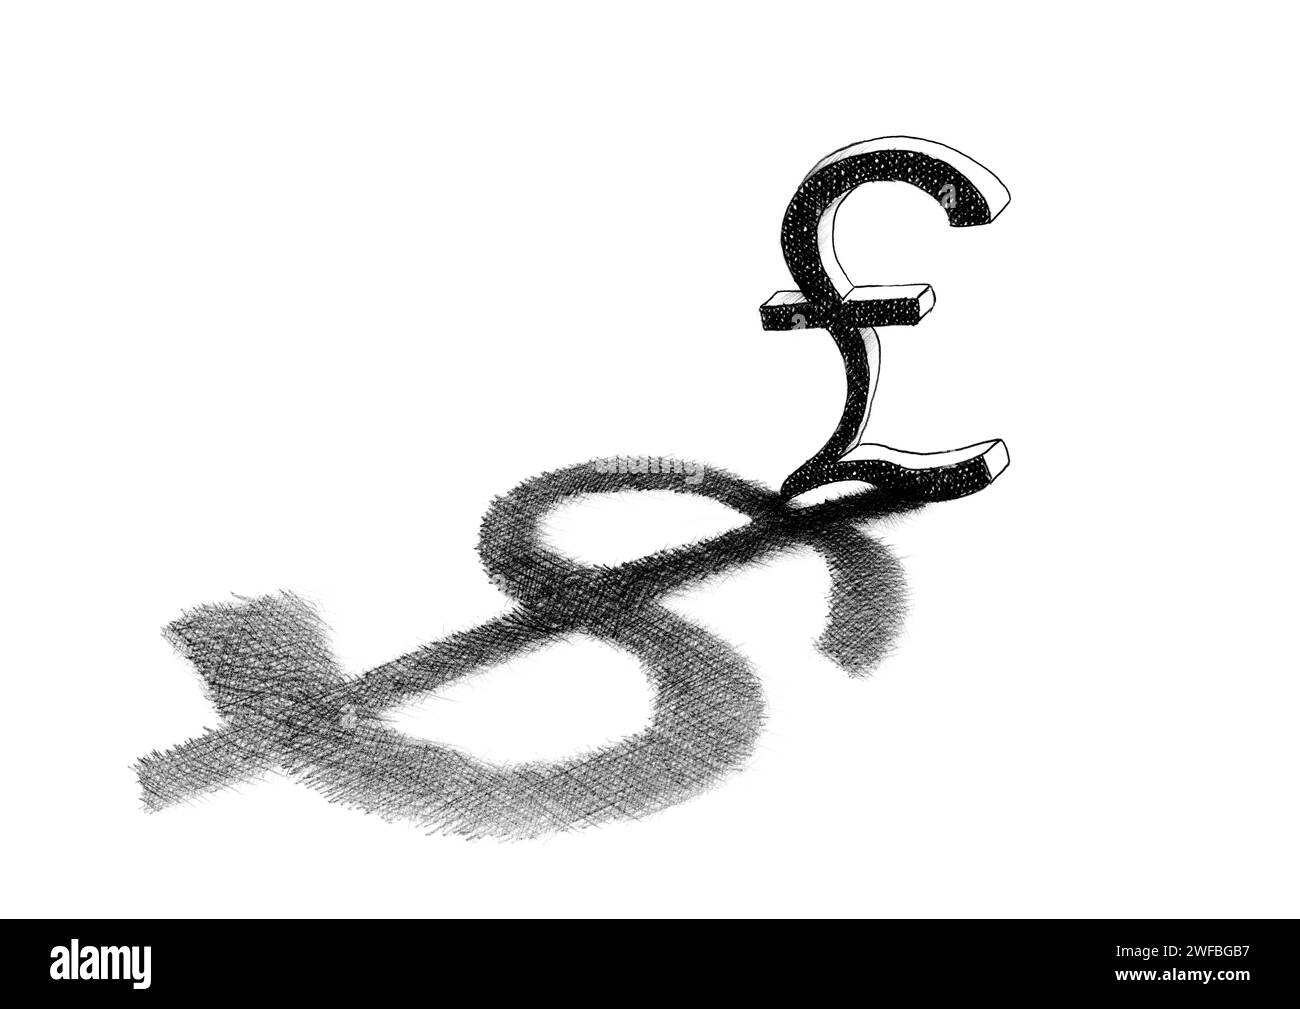 Hand drawn British pound sterling currency sign casting a US dollar shadow. Finance metaphor for dependency, financial domination, debt, loan, forex, Stock Photo